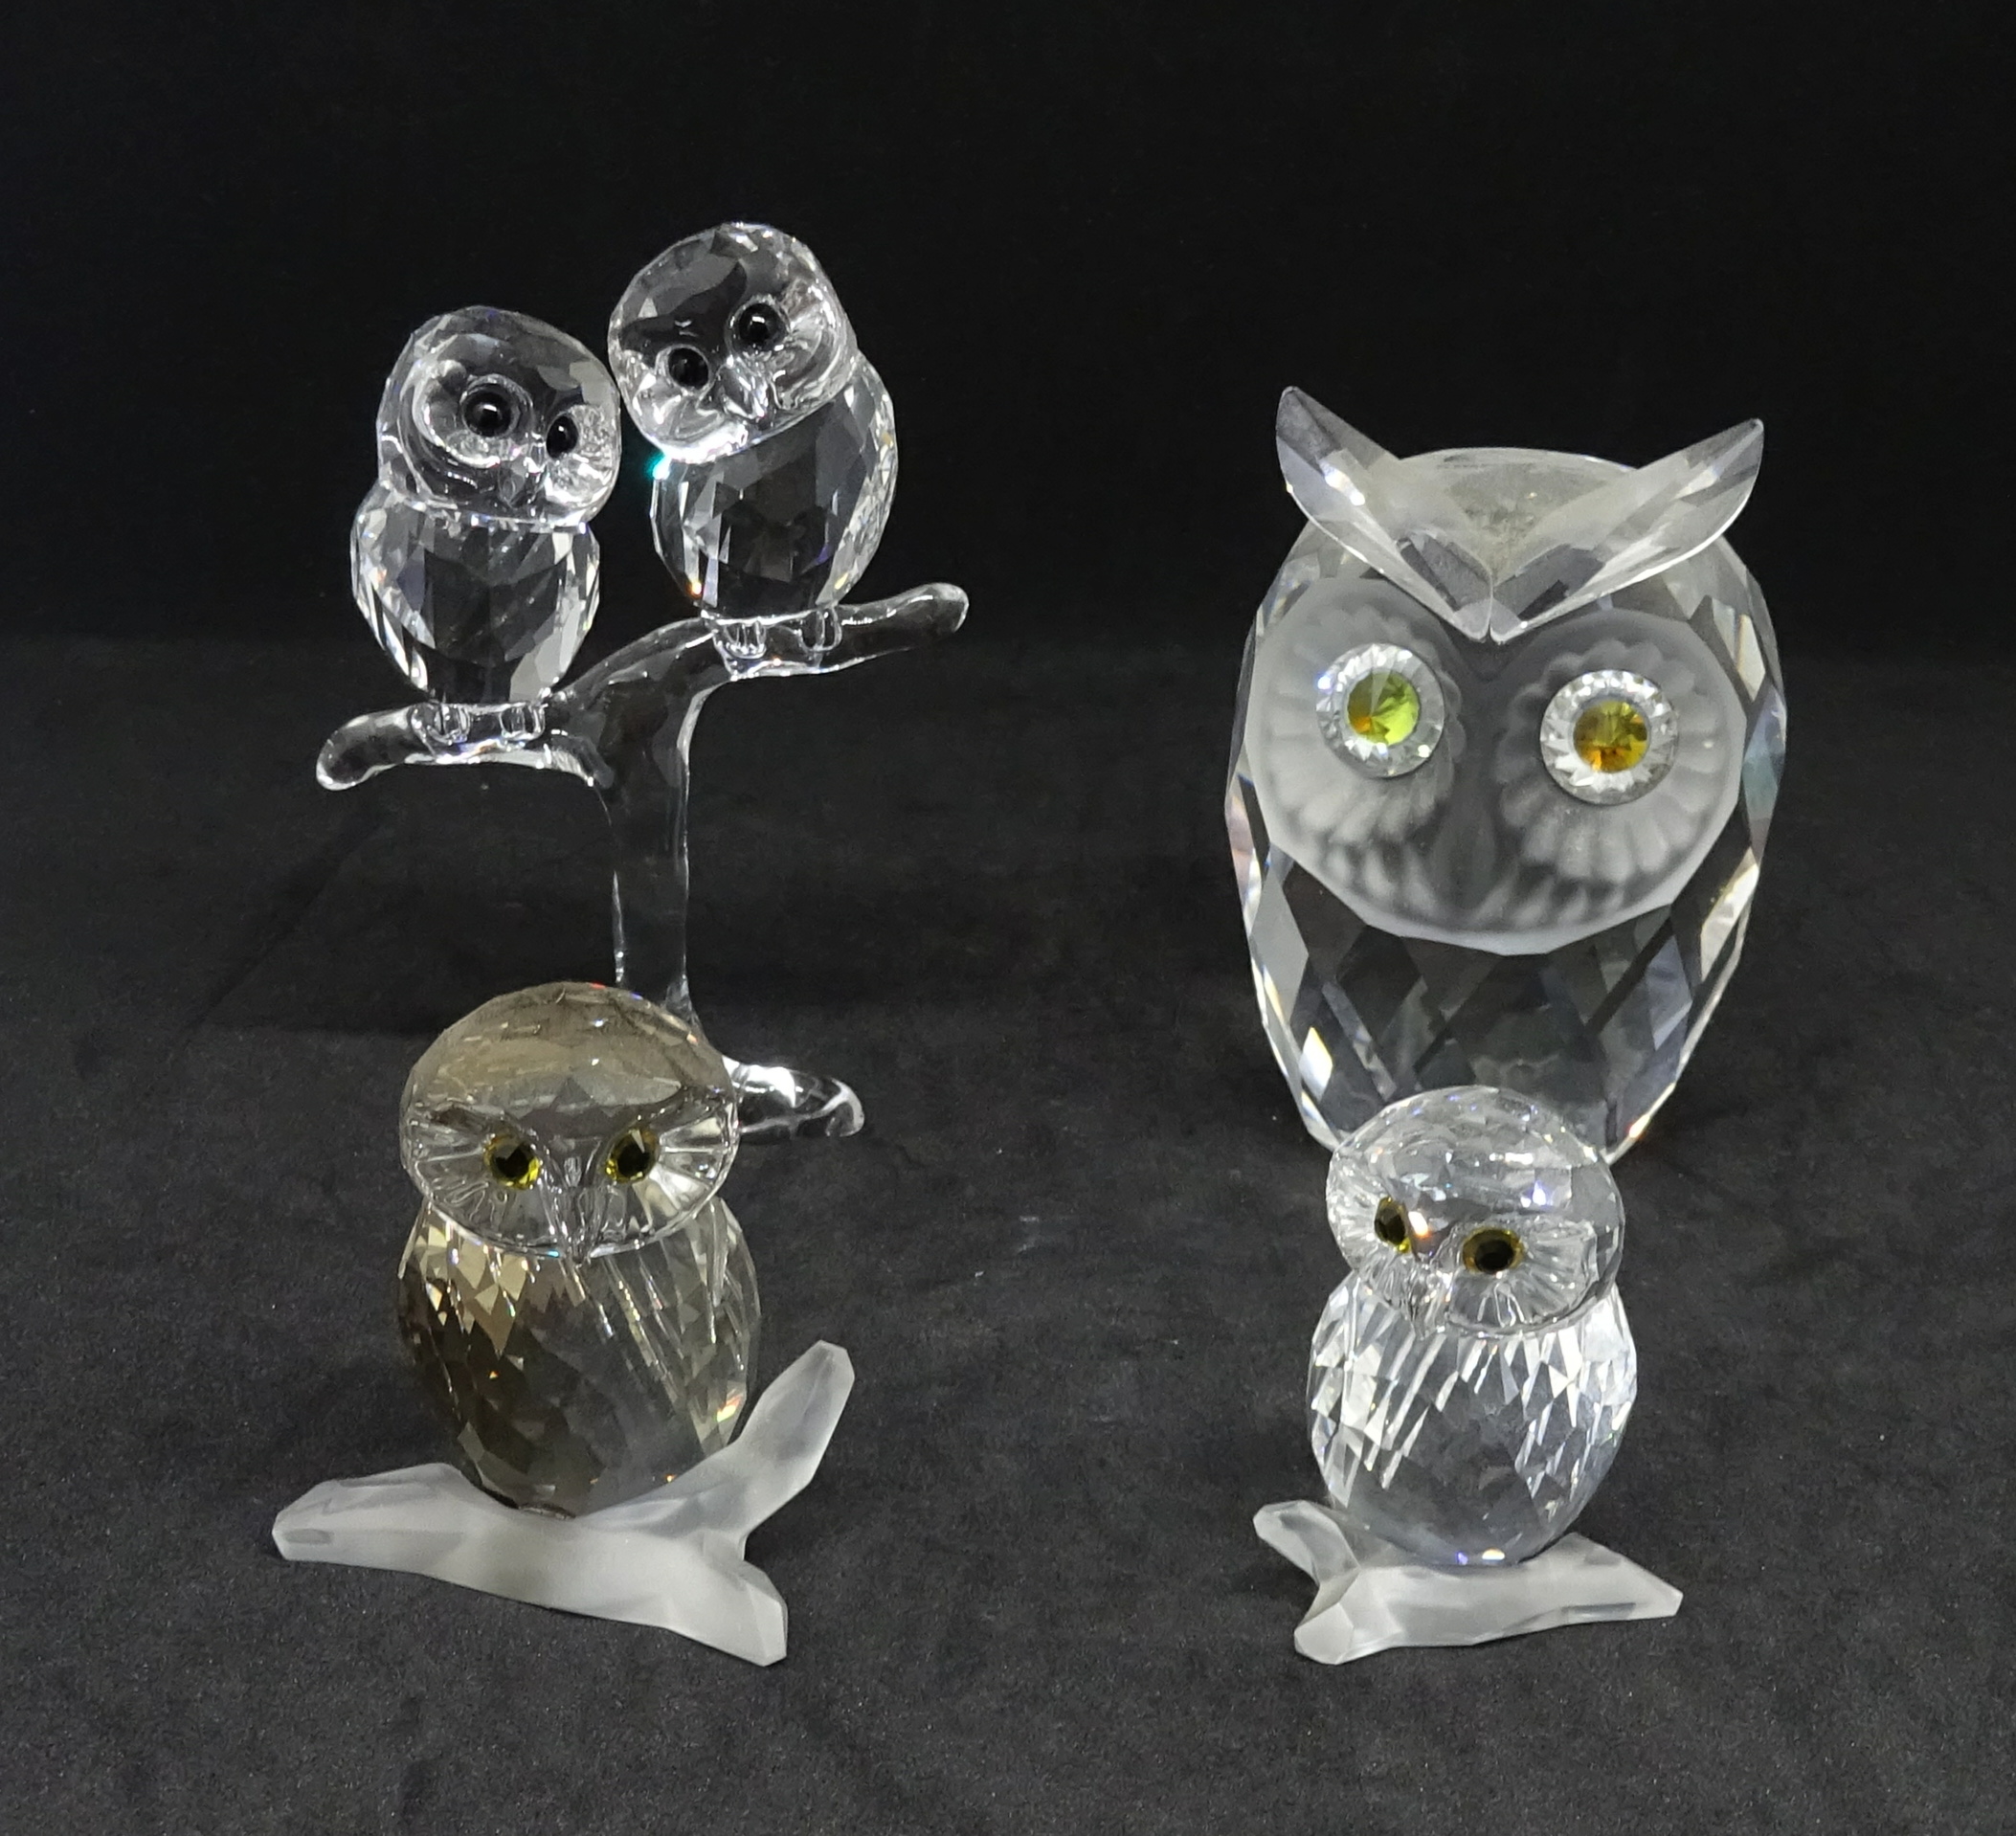 Swarovski Crystal, small collection of owls including brown owl, small owl, large owl and baby